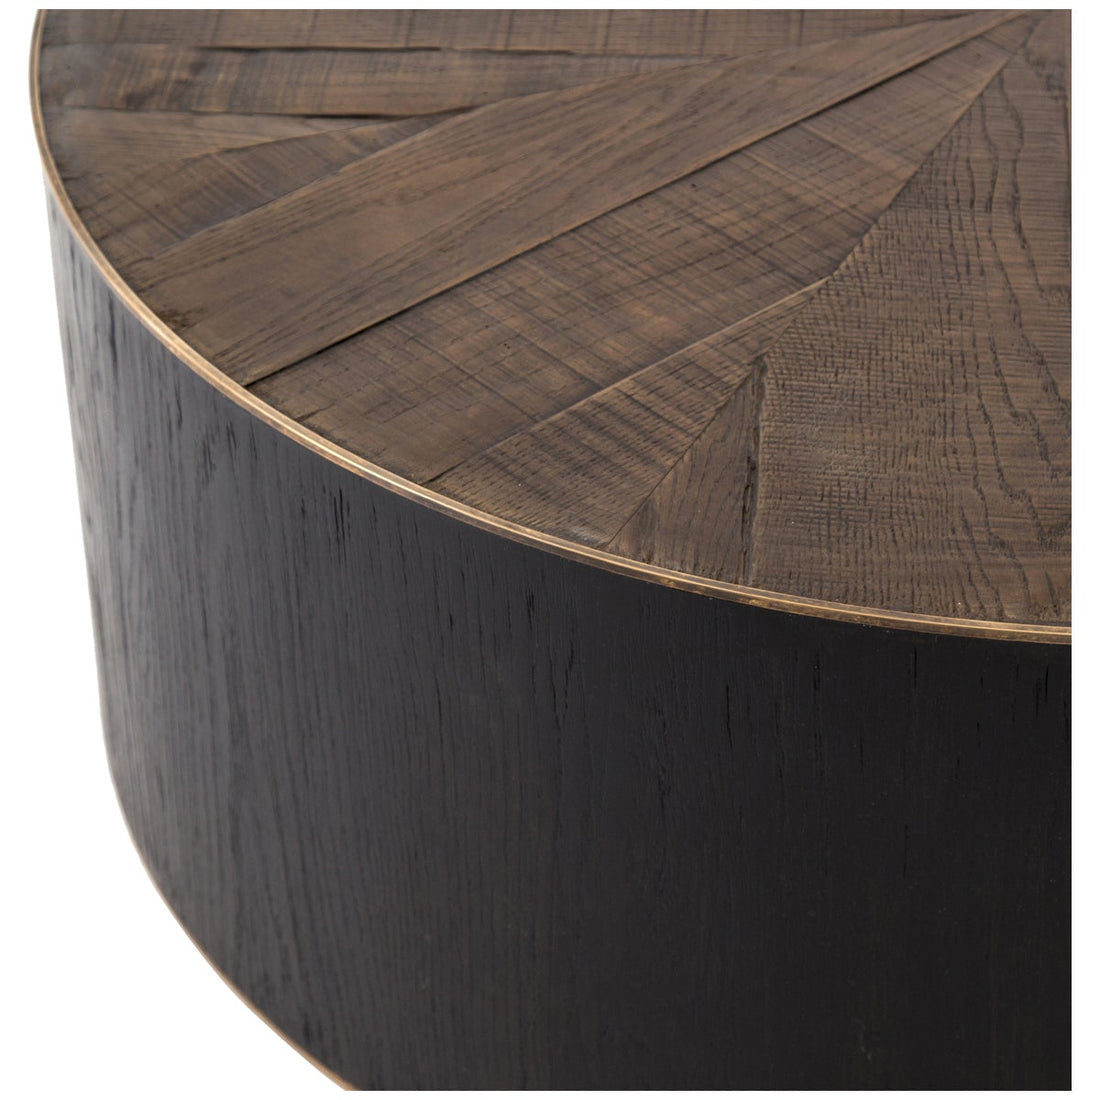 Four Hands Hughes Perry Coffee Table - Ebony